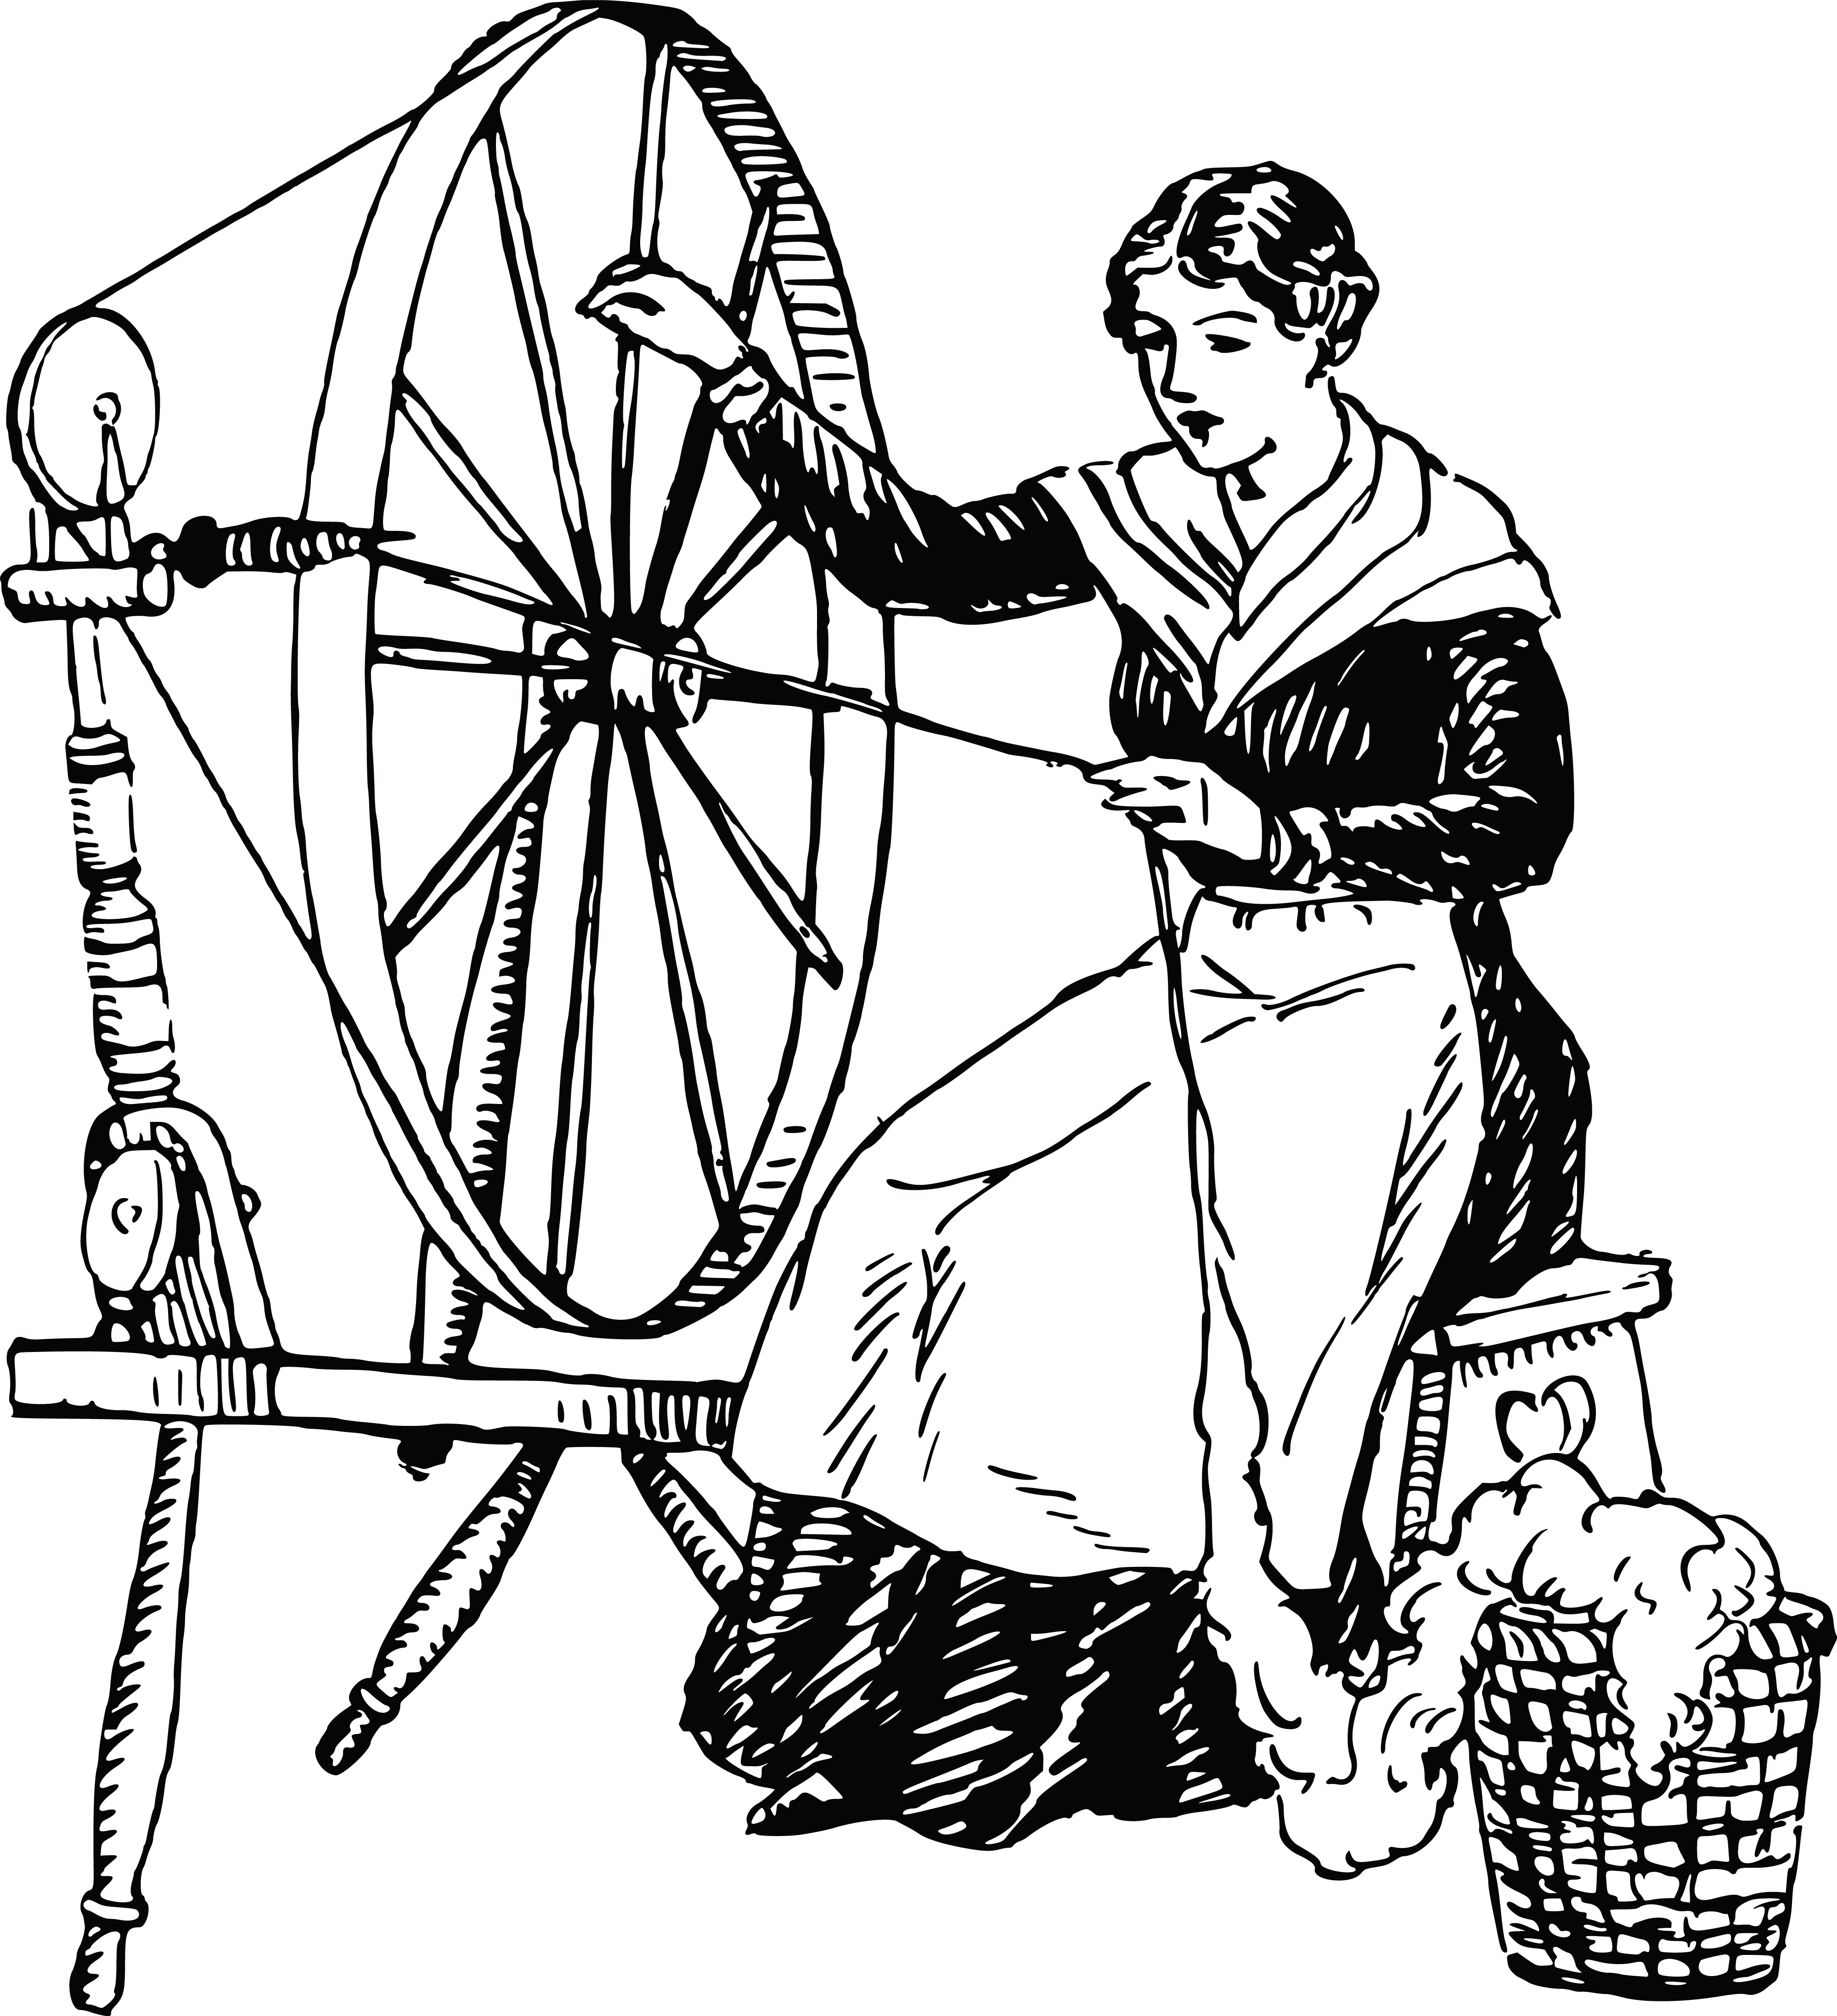 Free Clipart Of A woman using a spinning wheel